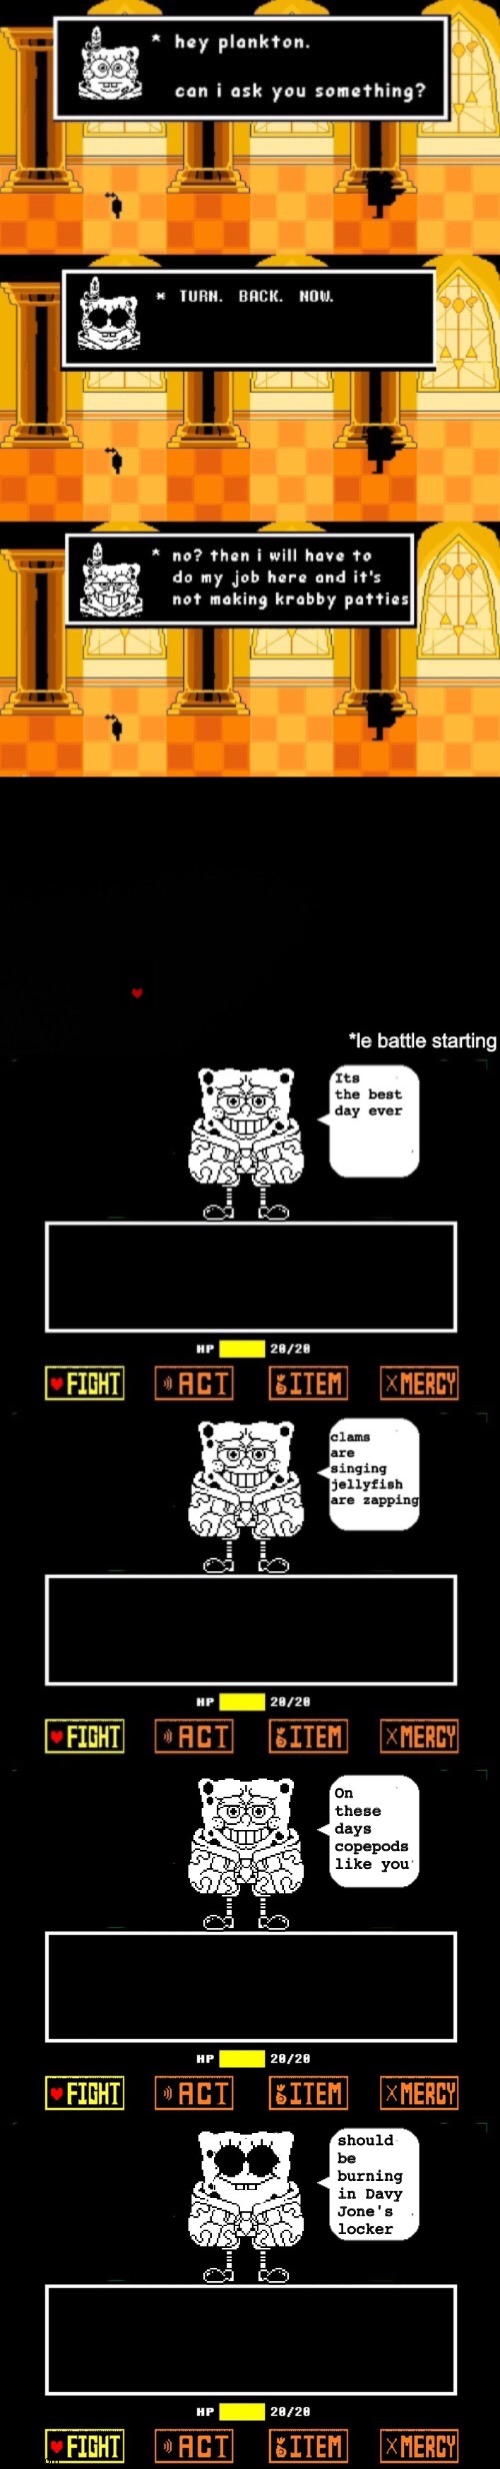 Some Spongeswap Comic thing I made (Overworld Sprites by me) | ITS THE BEST DAY EVER; CLAMS ARE SINGING JELLYFISH ARE ZAPPING; ON THESE DAYS COPEPODS LIKE YOU; SHOULD BE BURNING IN DAVY JONE'S LOCKER | image tagged in spongebob,spongeswap,au,comics/cartoons,memes,undertale | made w/ Imgflip meme maker